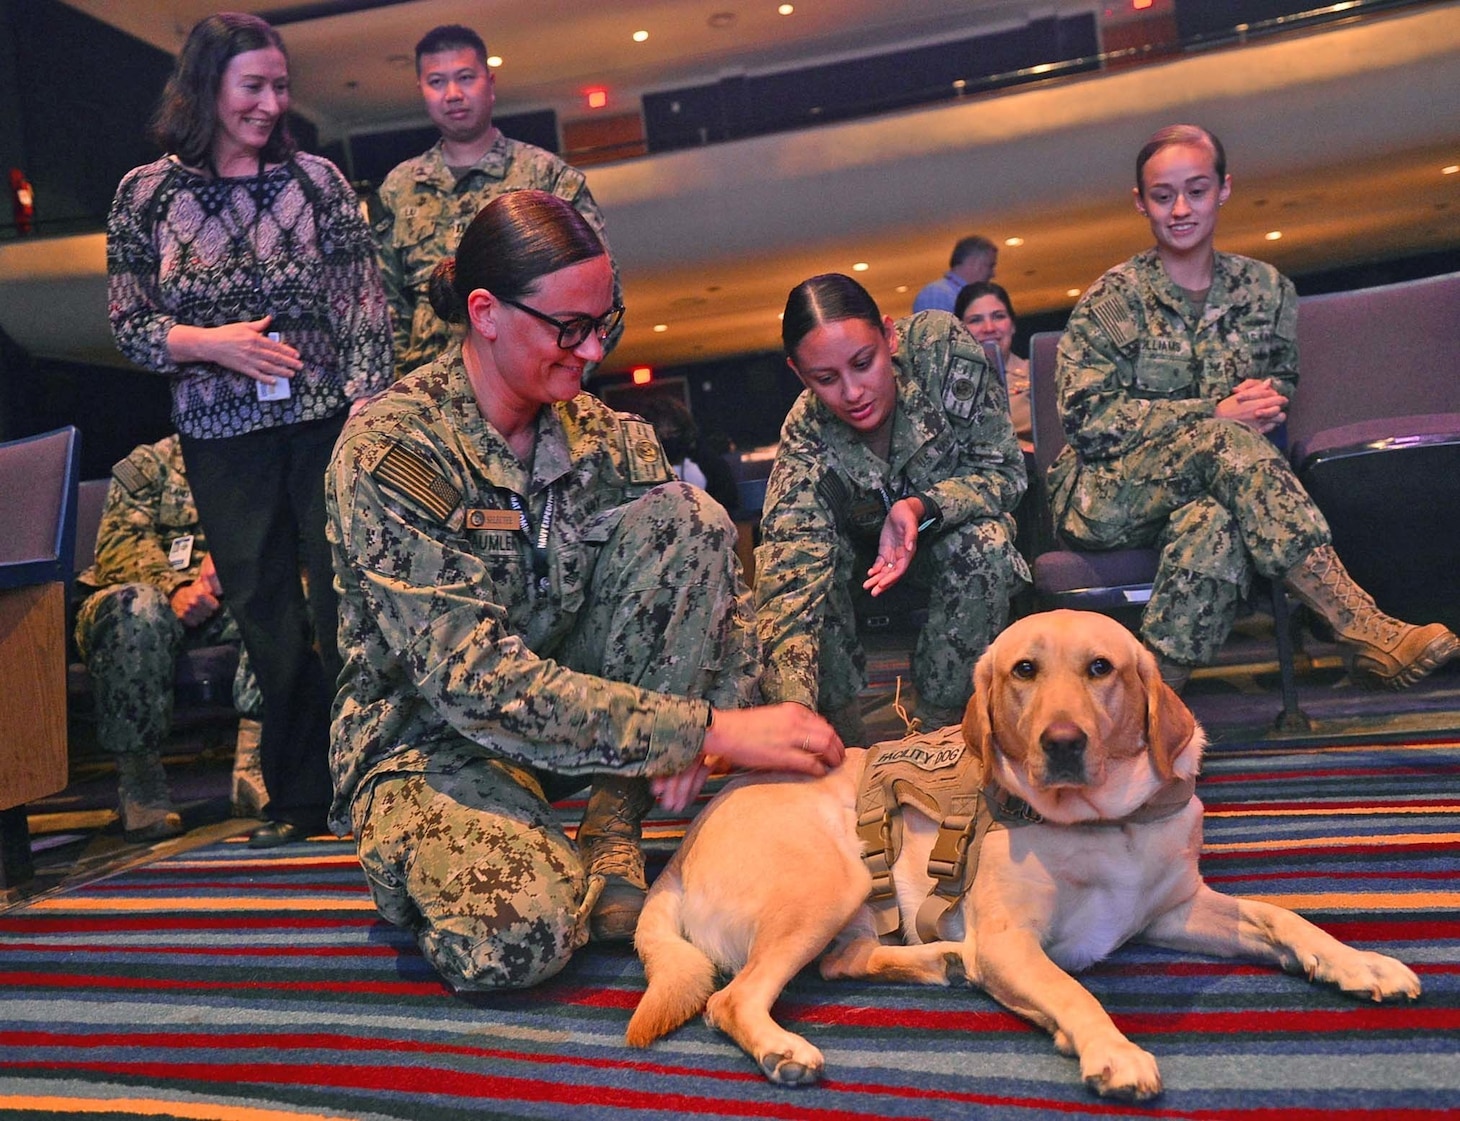 JOINT EXPEDITIONARY BASE LITTLE CREEK FORT STORY, VIRGINIA BEACH, VA (August 18, 2022) U.S. Navy Sailors and staff, attached to JOINT EXPEDITIONARY BASE LITTLE CREEK FORT STORY (JEBLCFS), interact with "Patty Mac", a facility dog, during a Professional development (PRODEV) training onboard Joint Expeditionary Base Little Creek Fort Story. (U.S. Navy photo by Mass Communication Specialist 1st Class Marlon Goodchild)